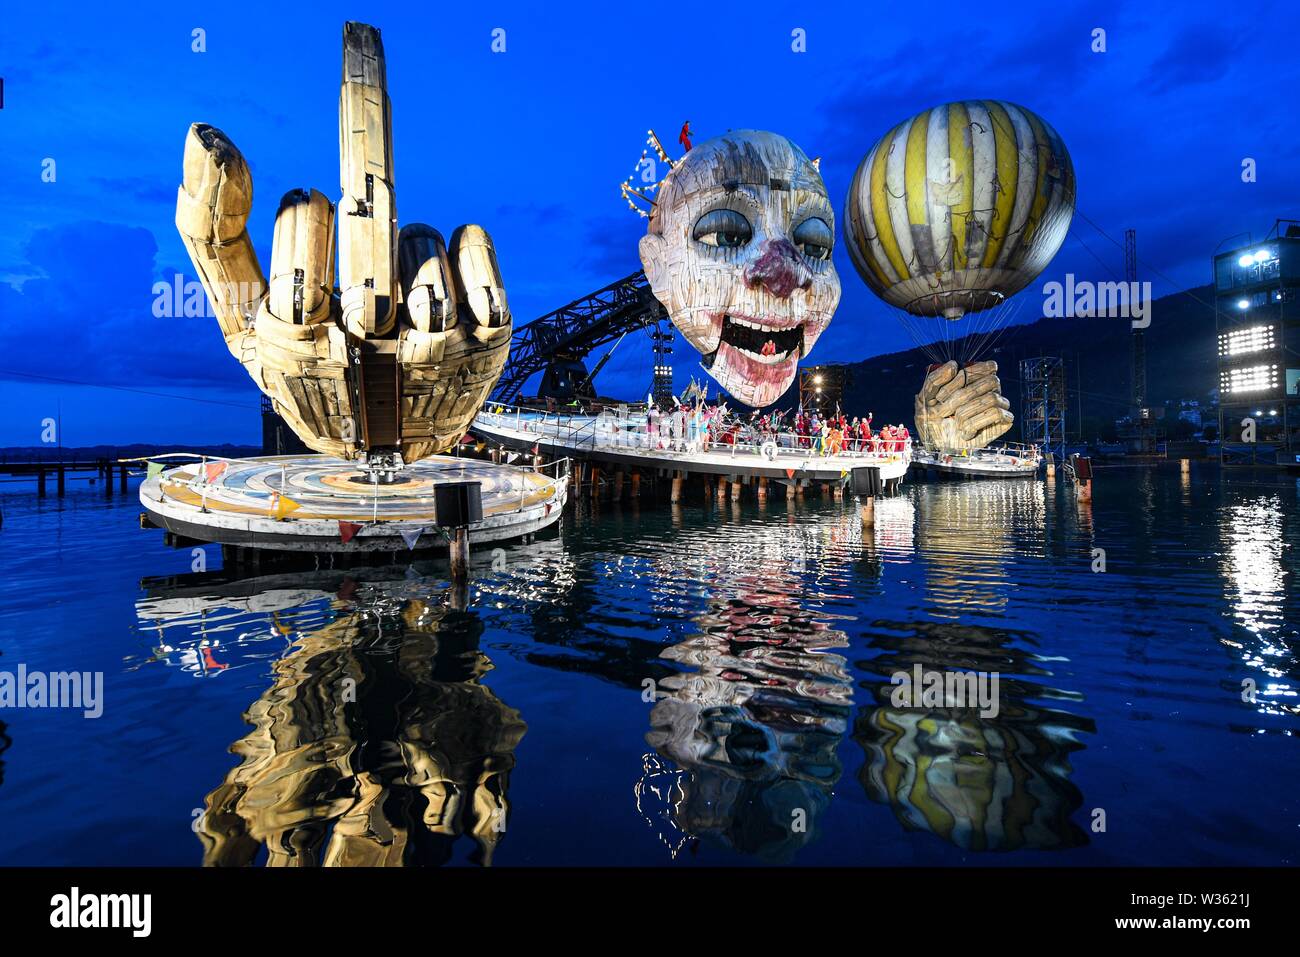 Bregenz, Austria. 12th July, 2019. The opera Rigoletto by Giuseppe Verdi is  performed on the lake stage of the Bregenz Festival. Credit: Felix  Kästle/dpa/Alamy Live News Stock Photo - Alamy